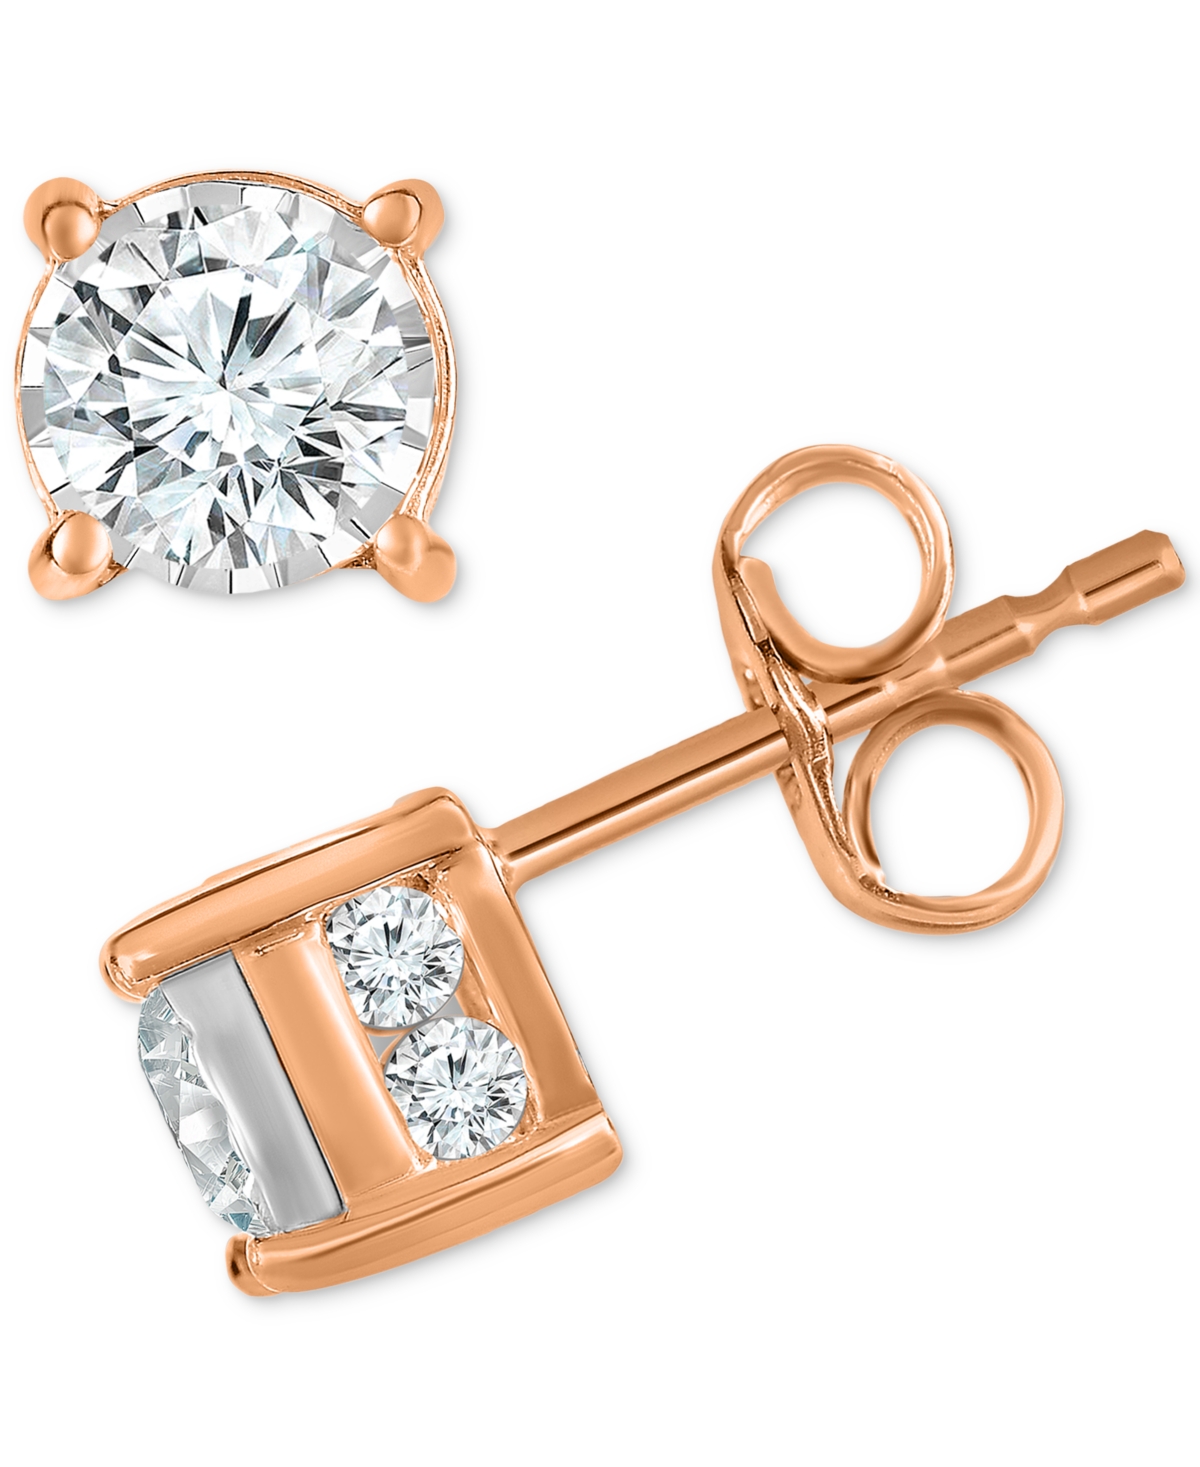 Diamond Stud Earrings (1 ct. t.w.) in 14k White, Yellow or Rose Gold - Rose Gold